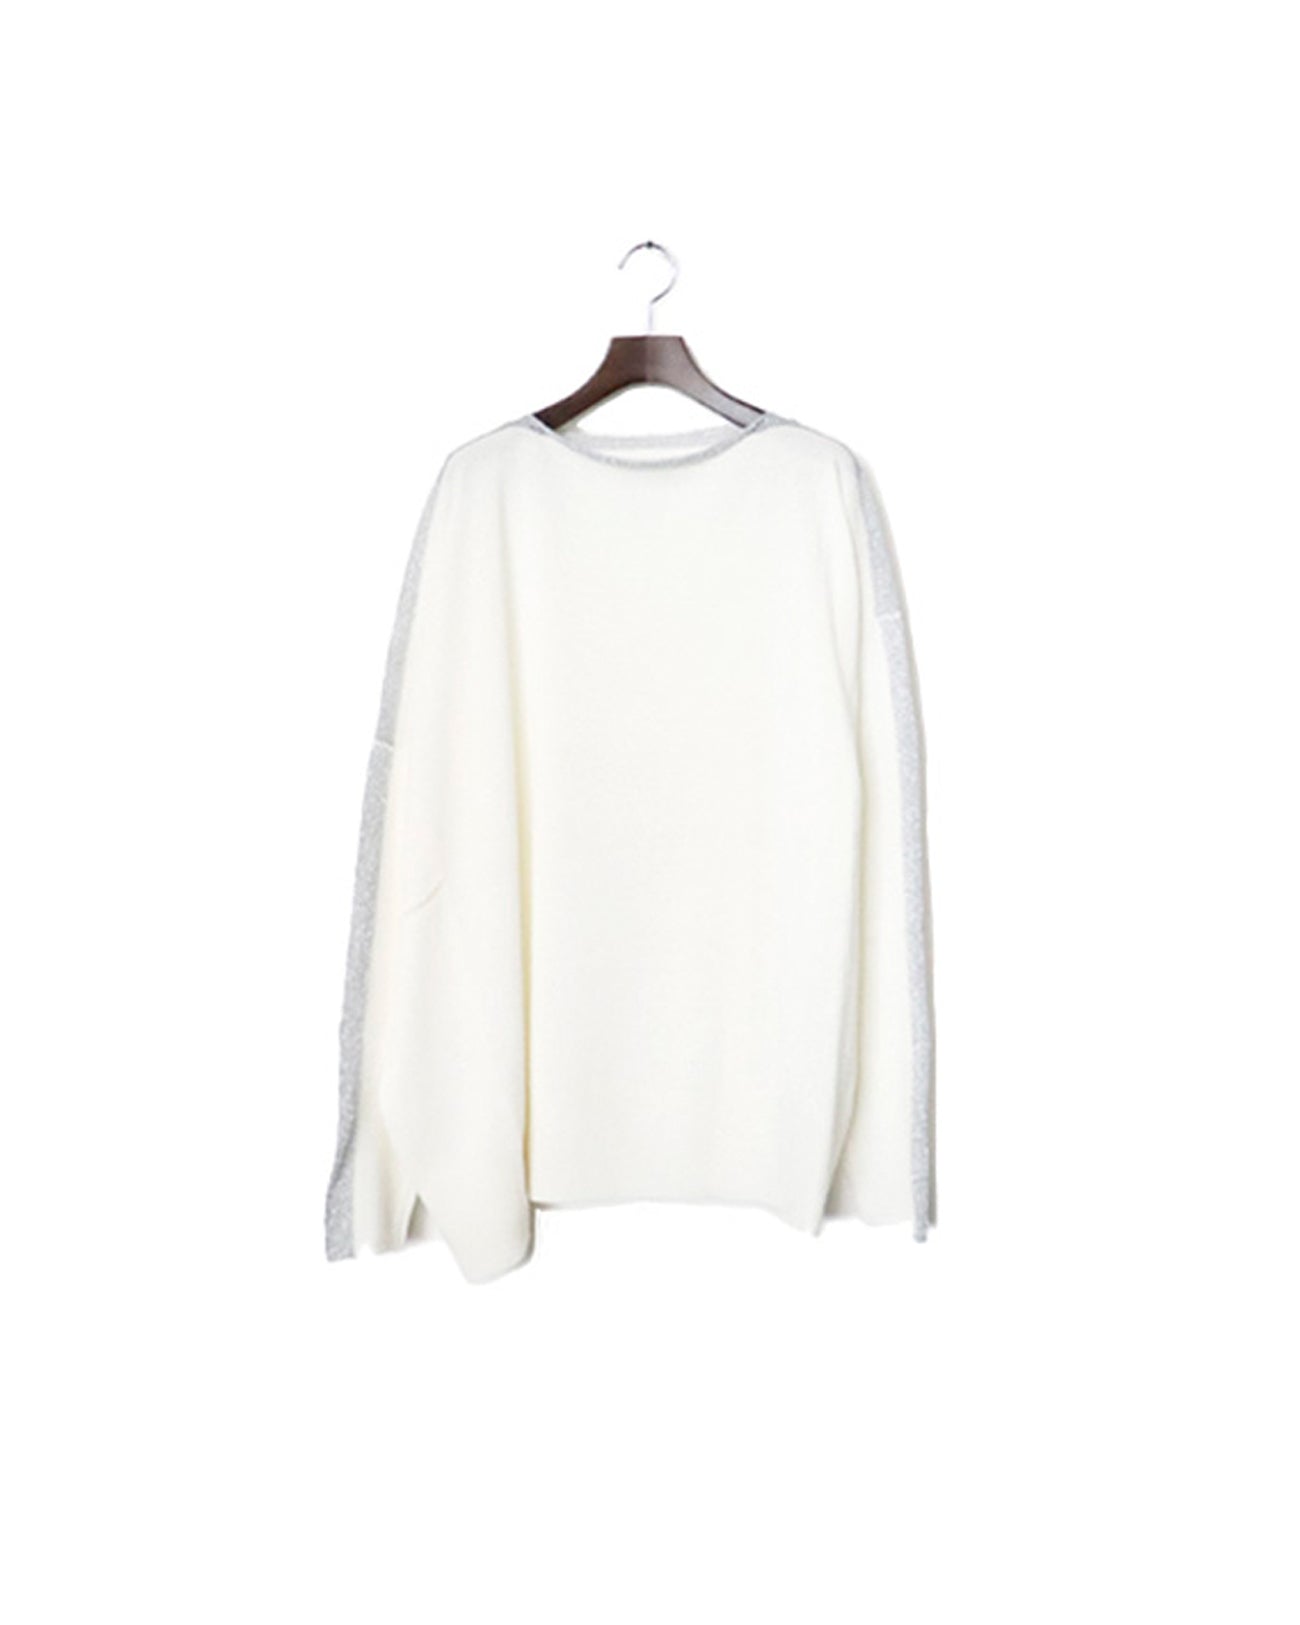 Silver line knit (WHT) - FAB4 ONLINE STORE